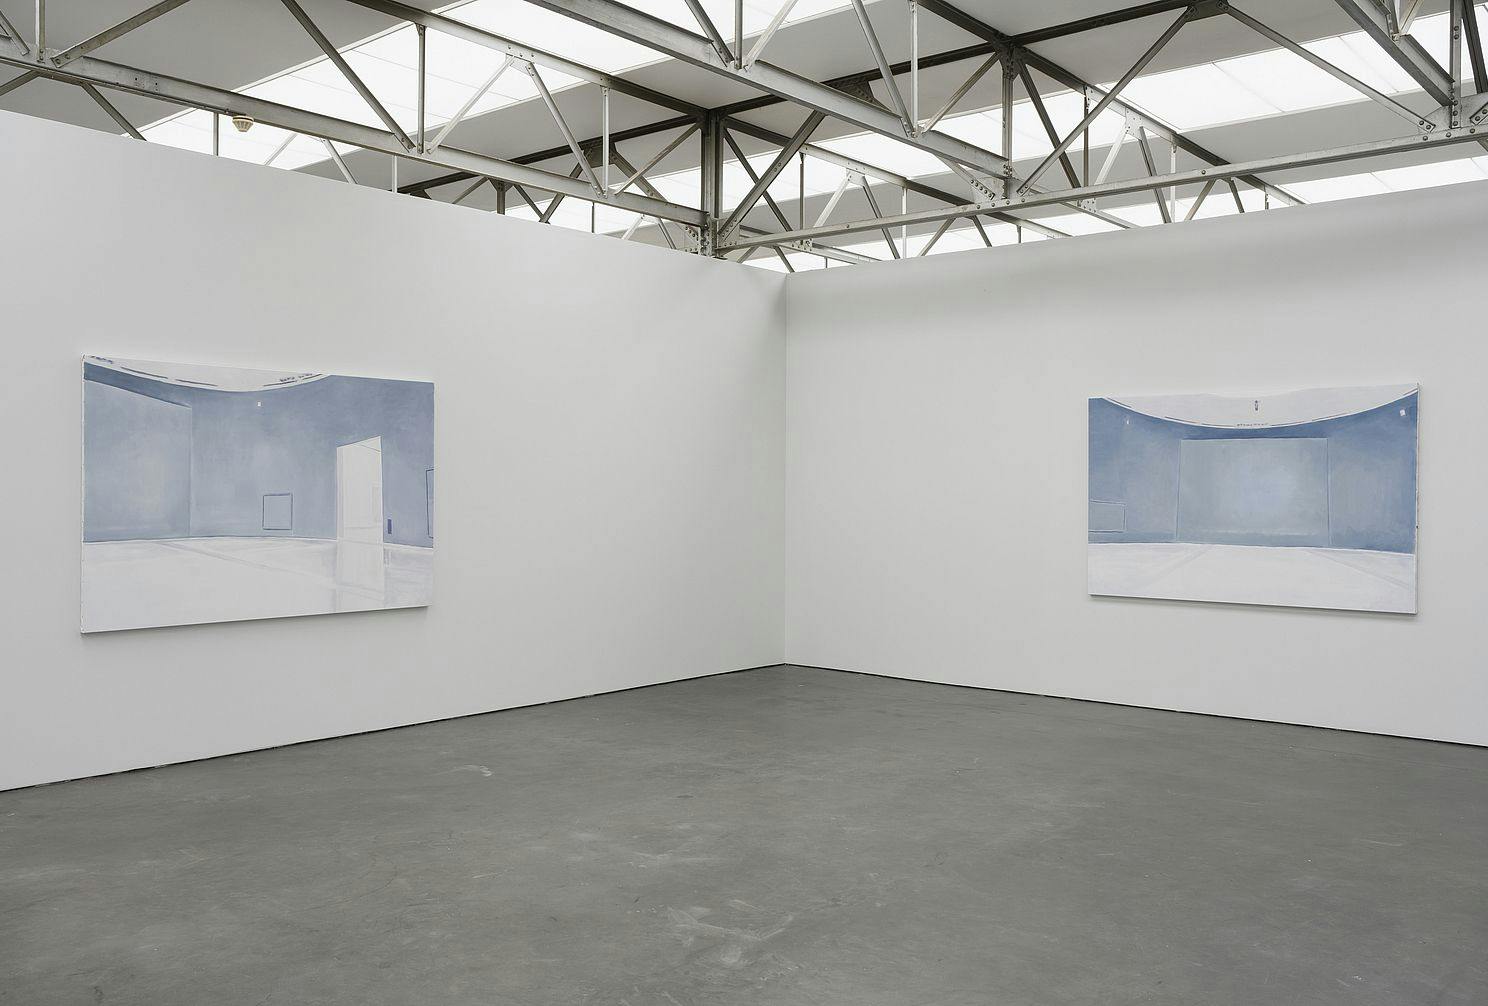 An Installation view of the exhibition, Luc Tuymans: The Return, at De Pont Museum in the Netherlands, dated 1995.